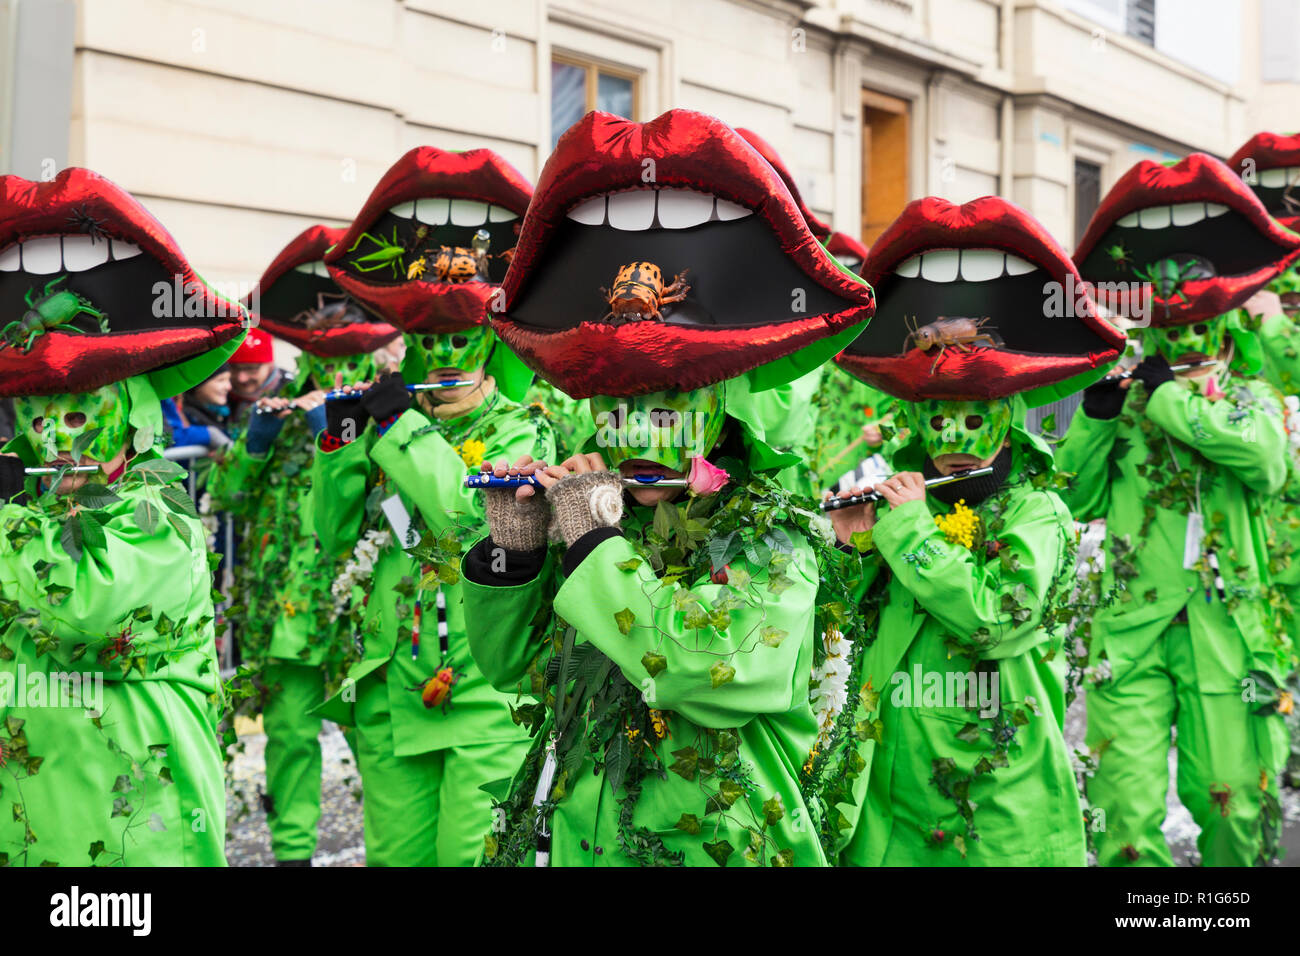 Basel carnival. Steinenberg, Basel, Switzerland - February 21st, 2018. Close-up of a carnival group in bright green costumes with red mouths on their  Stock Photo